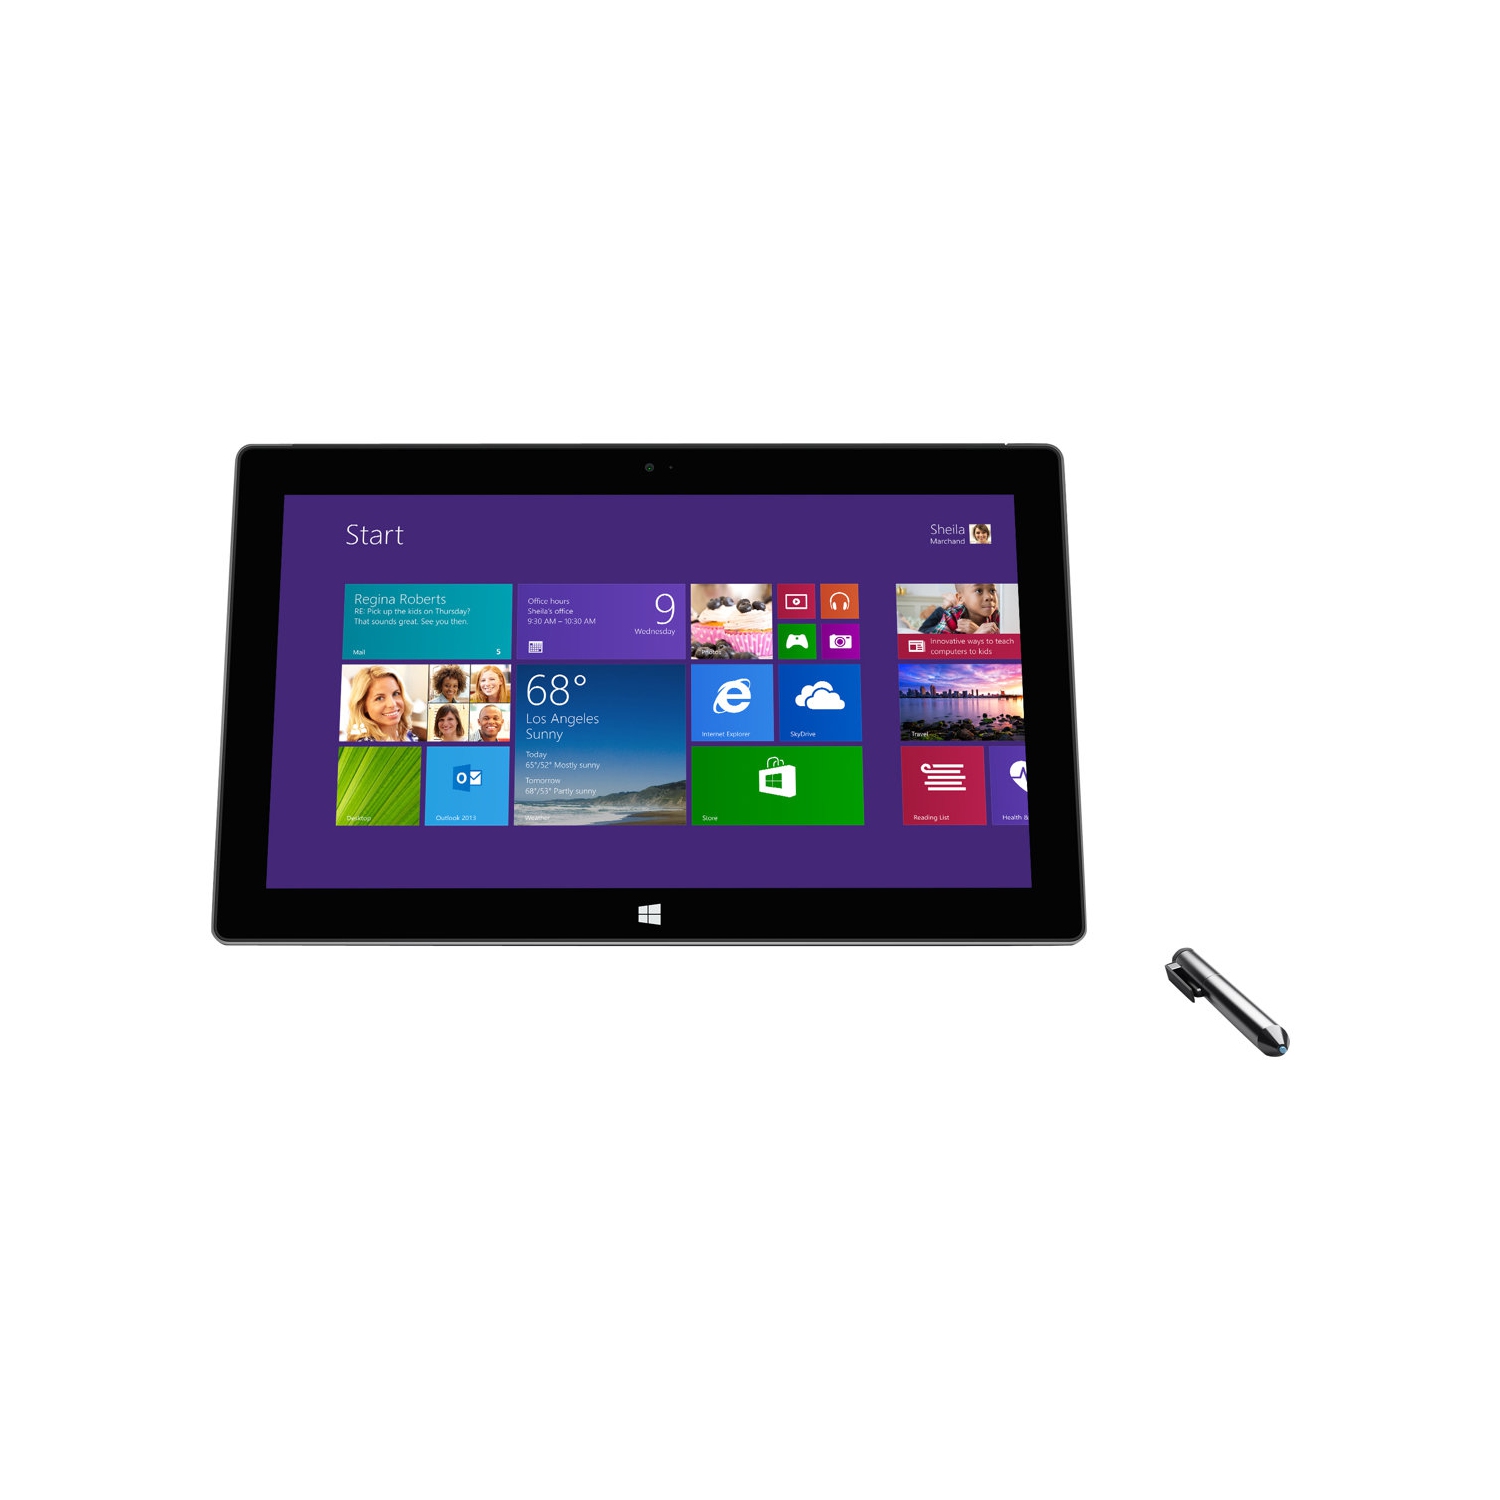 Refurbished (Good) - Microsoft Surface Pro 2 Tablet, Intel Core i5 4th GEN, 4GB RAM, 120GB SSD with AC Charger